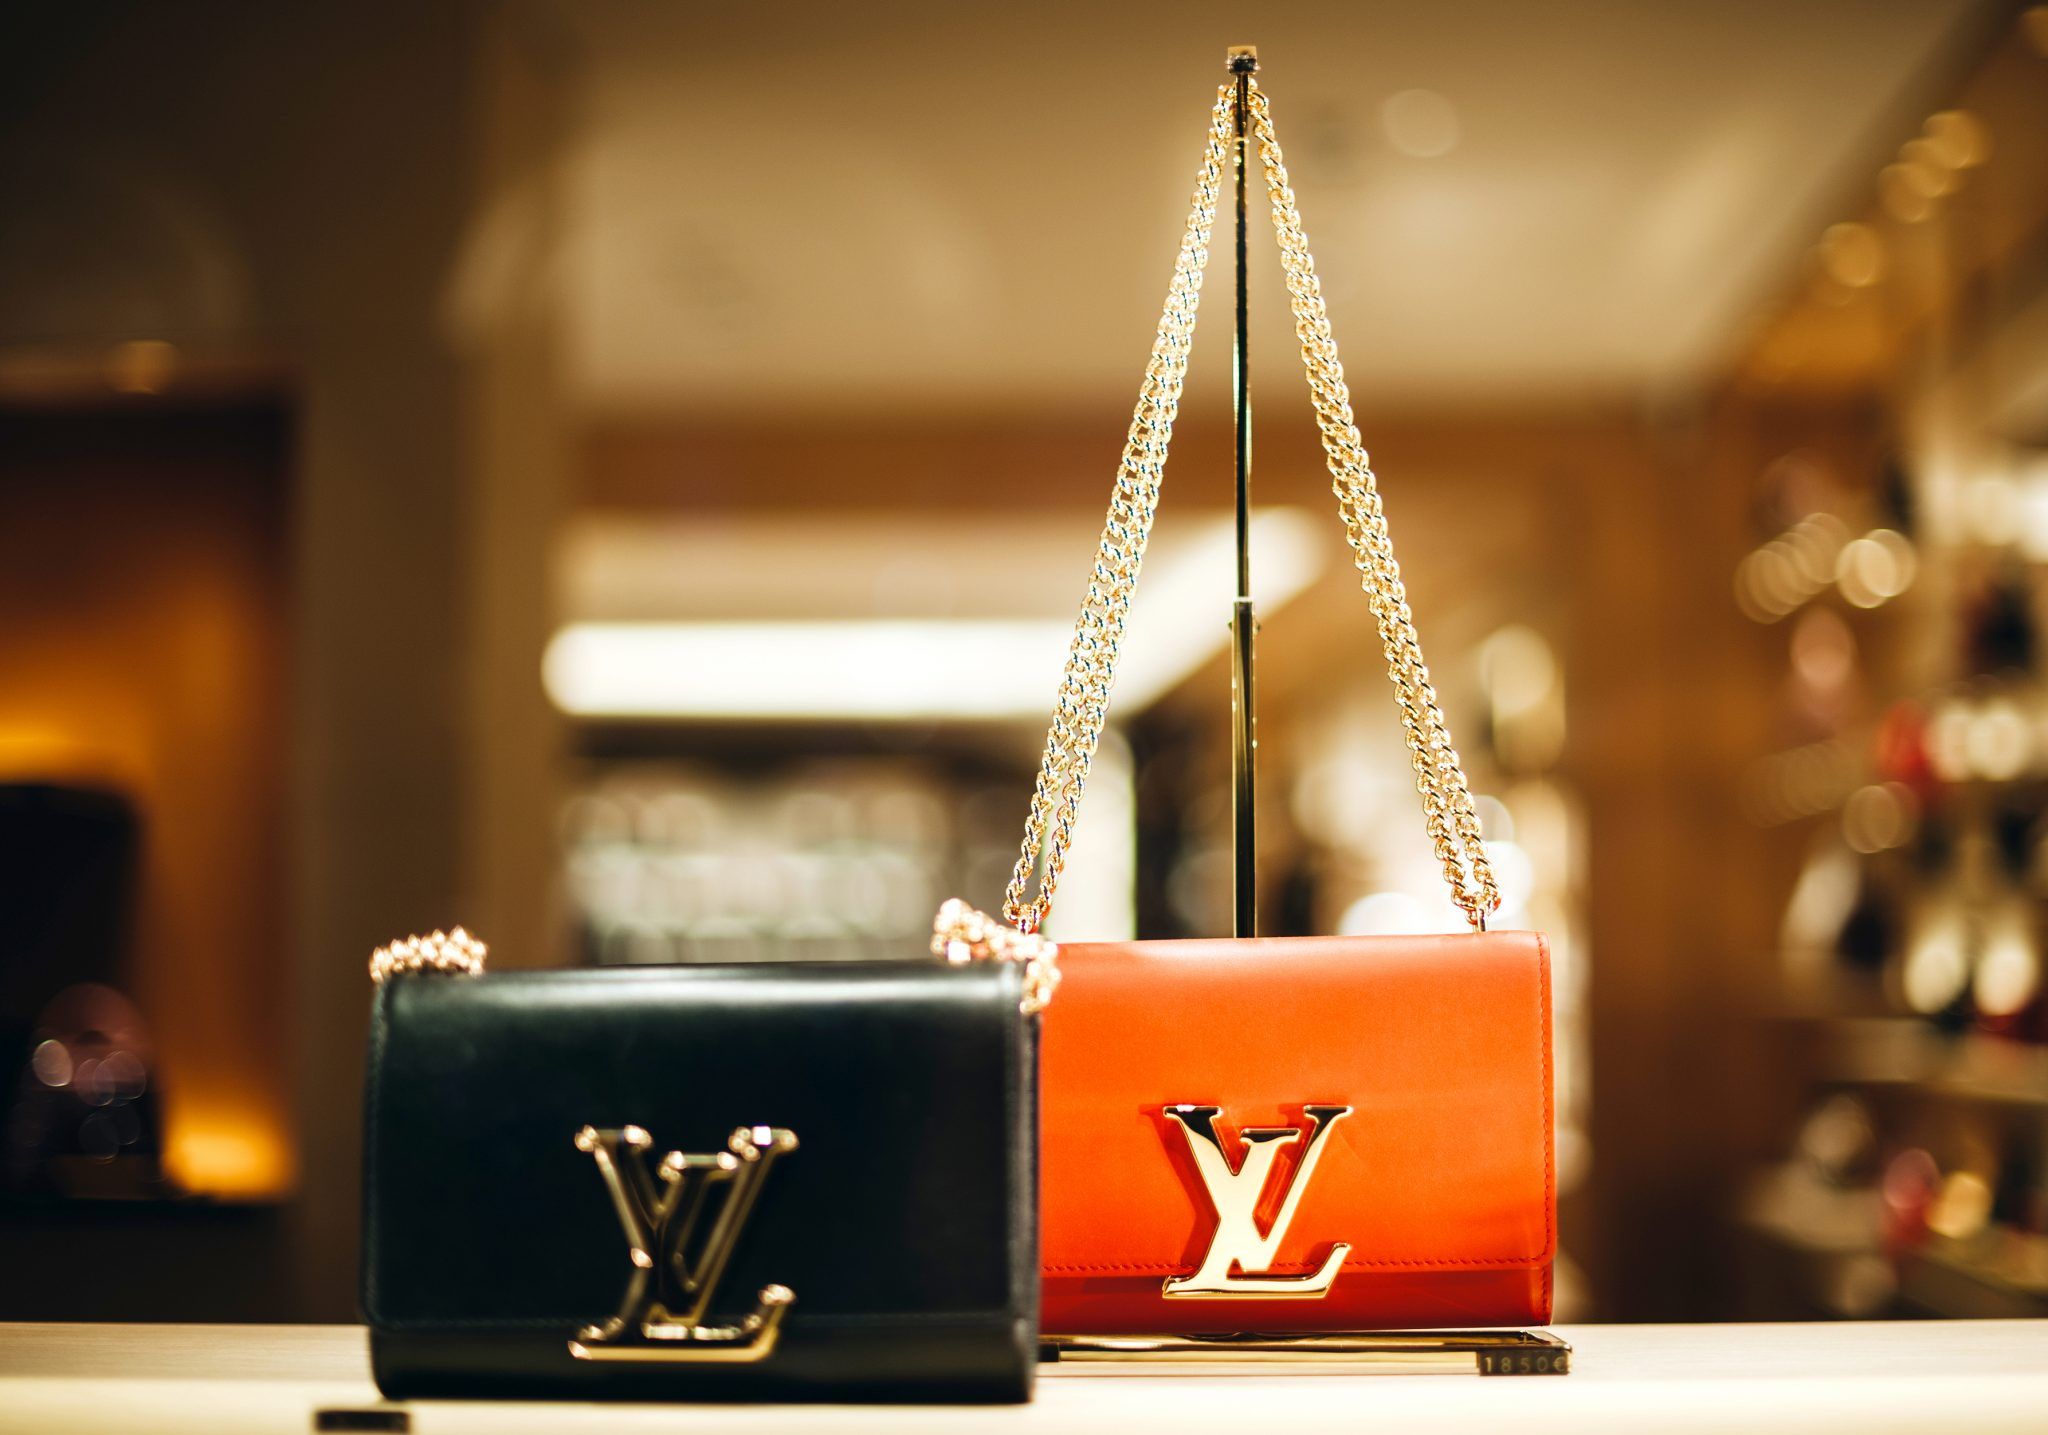 LVMH Shares Keenly Watched For Clues to China, Luxury Spending